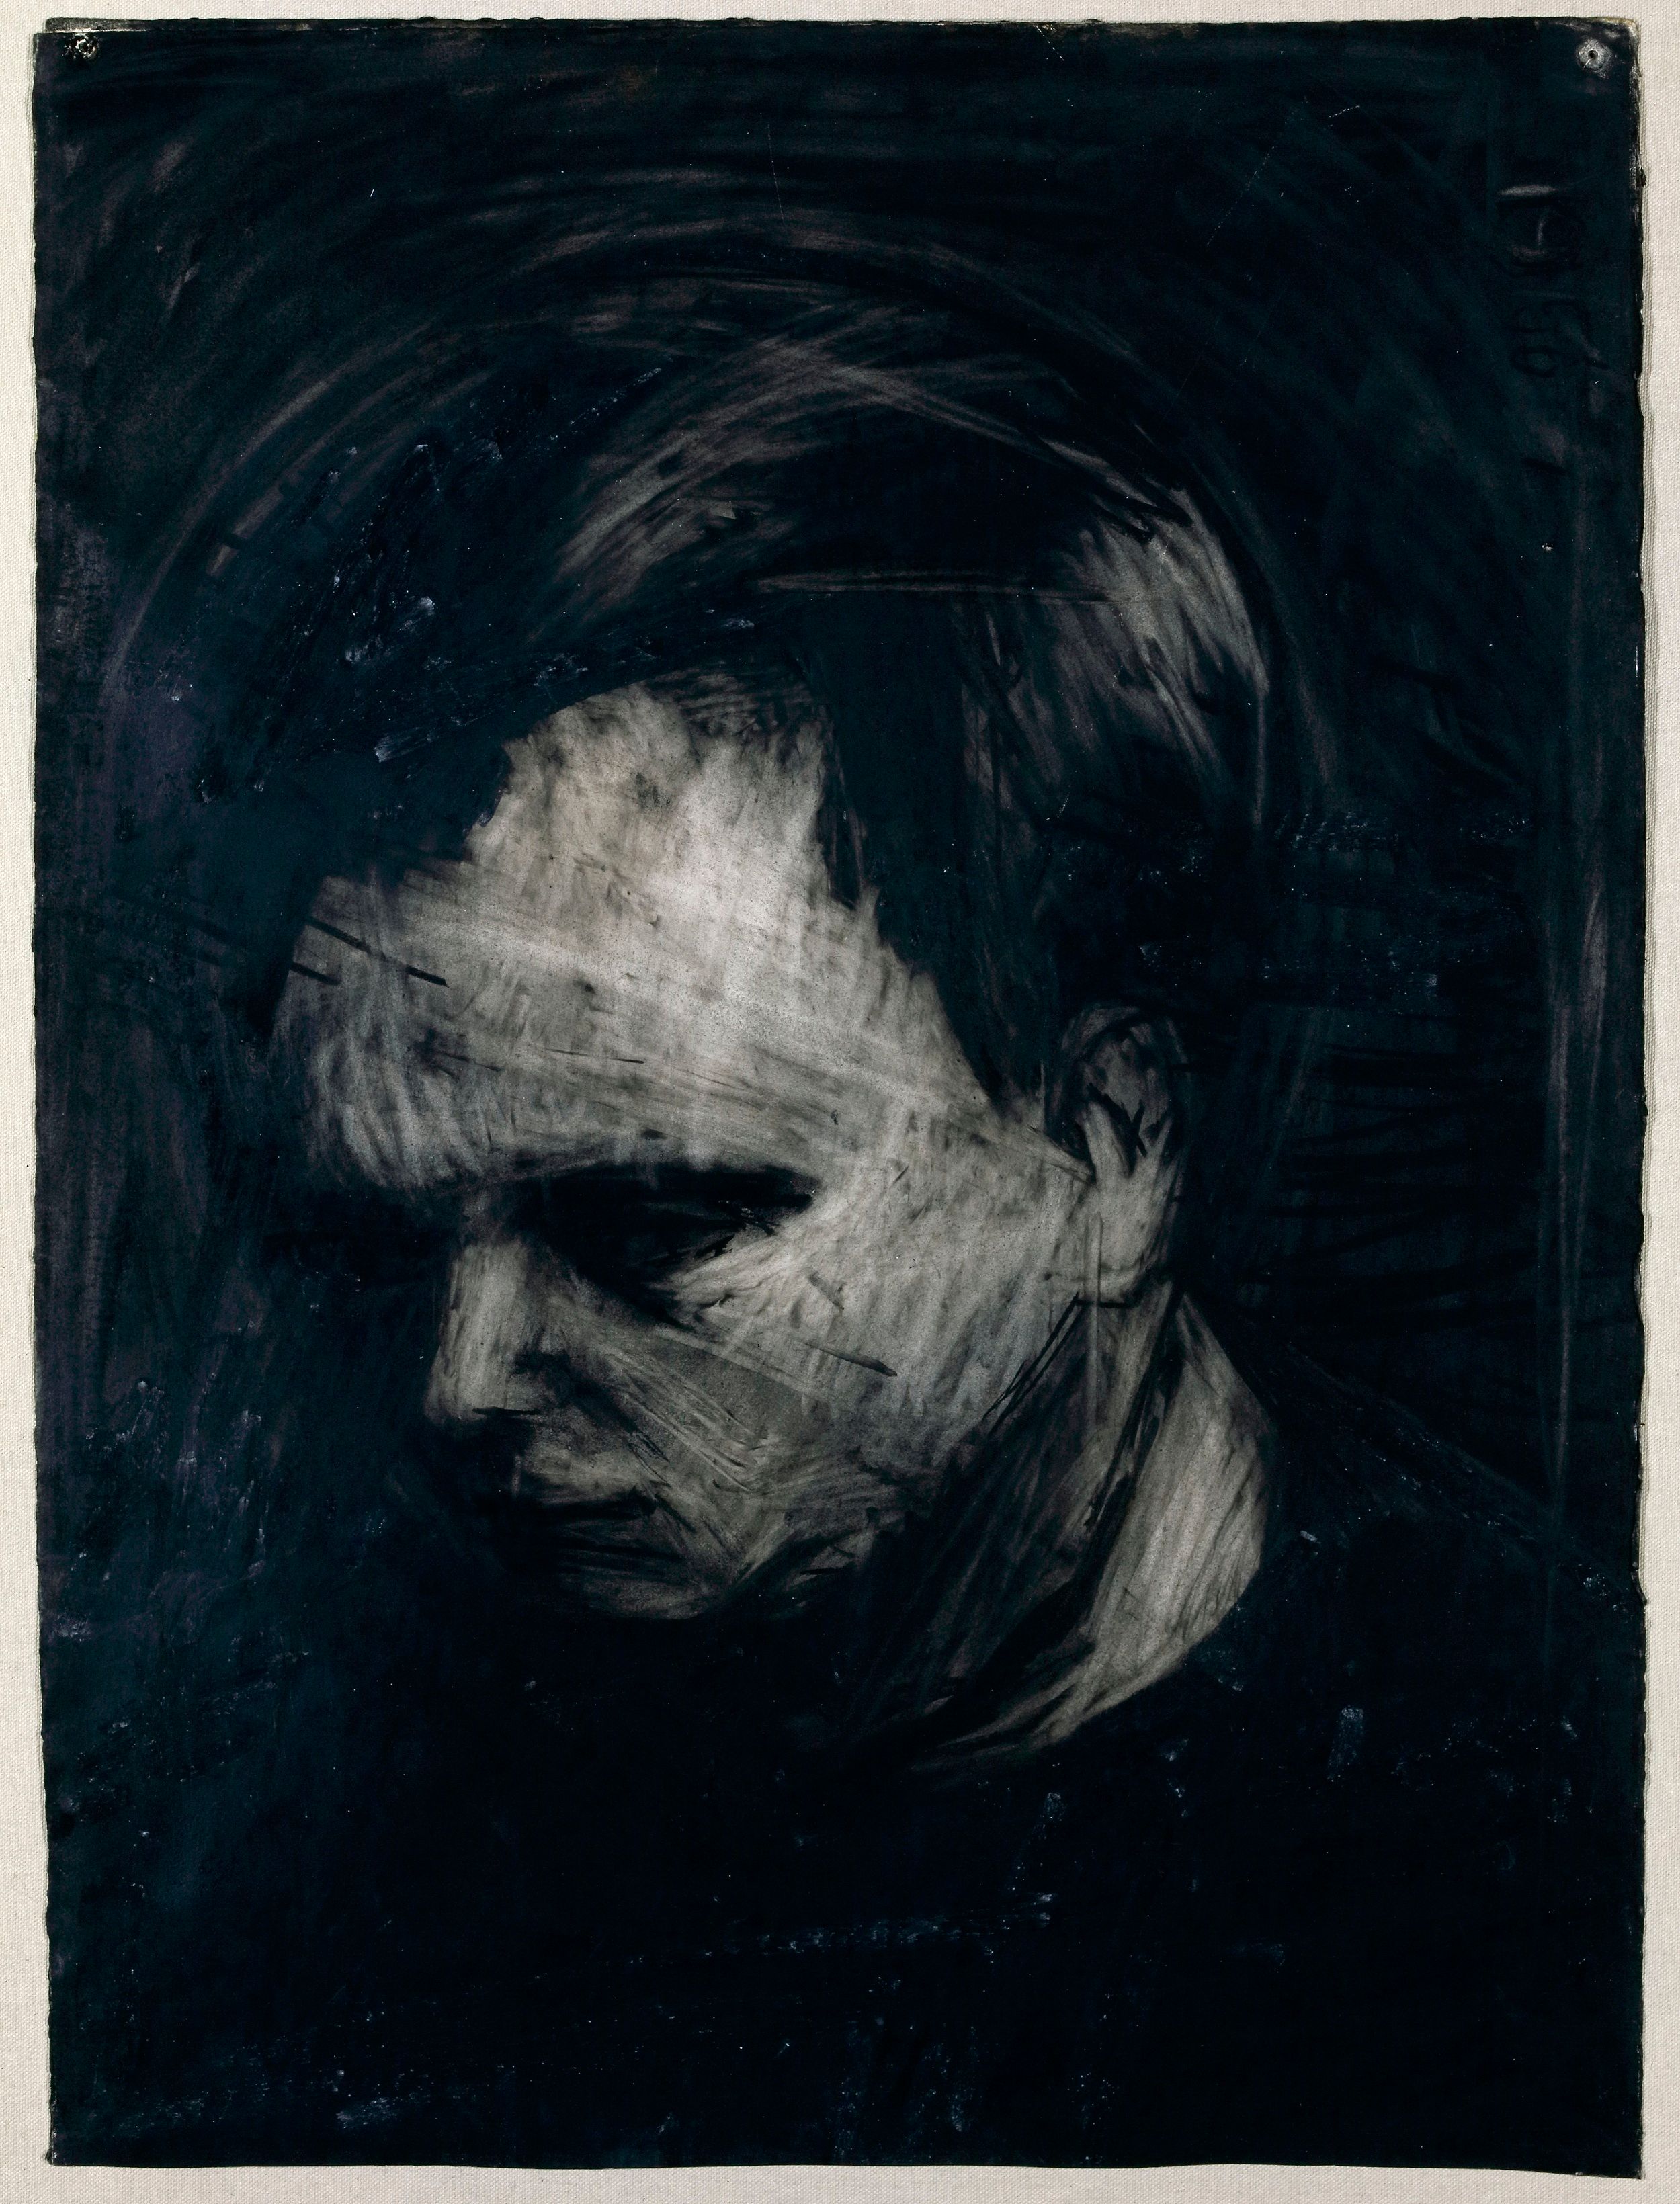 Frank Auerbach’s Haunting Heads at The Courtauld - Ocula Advisory